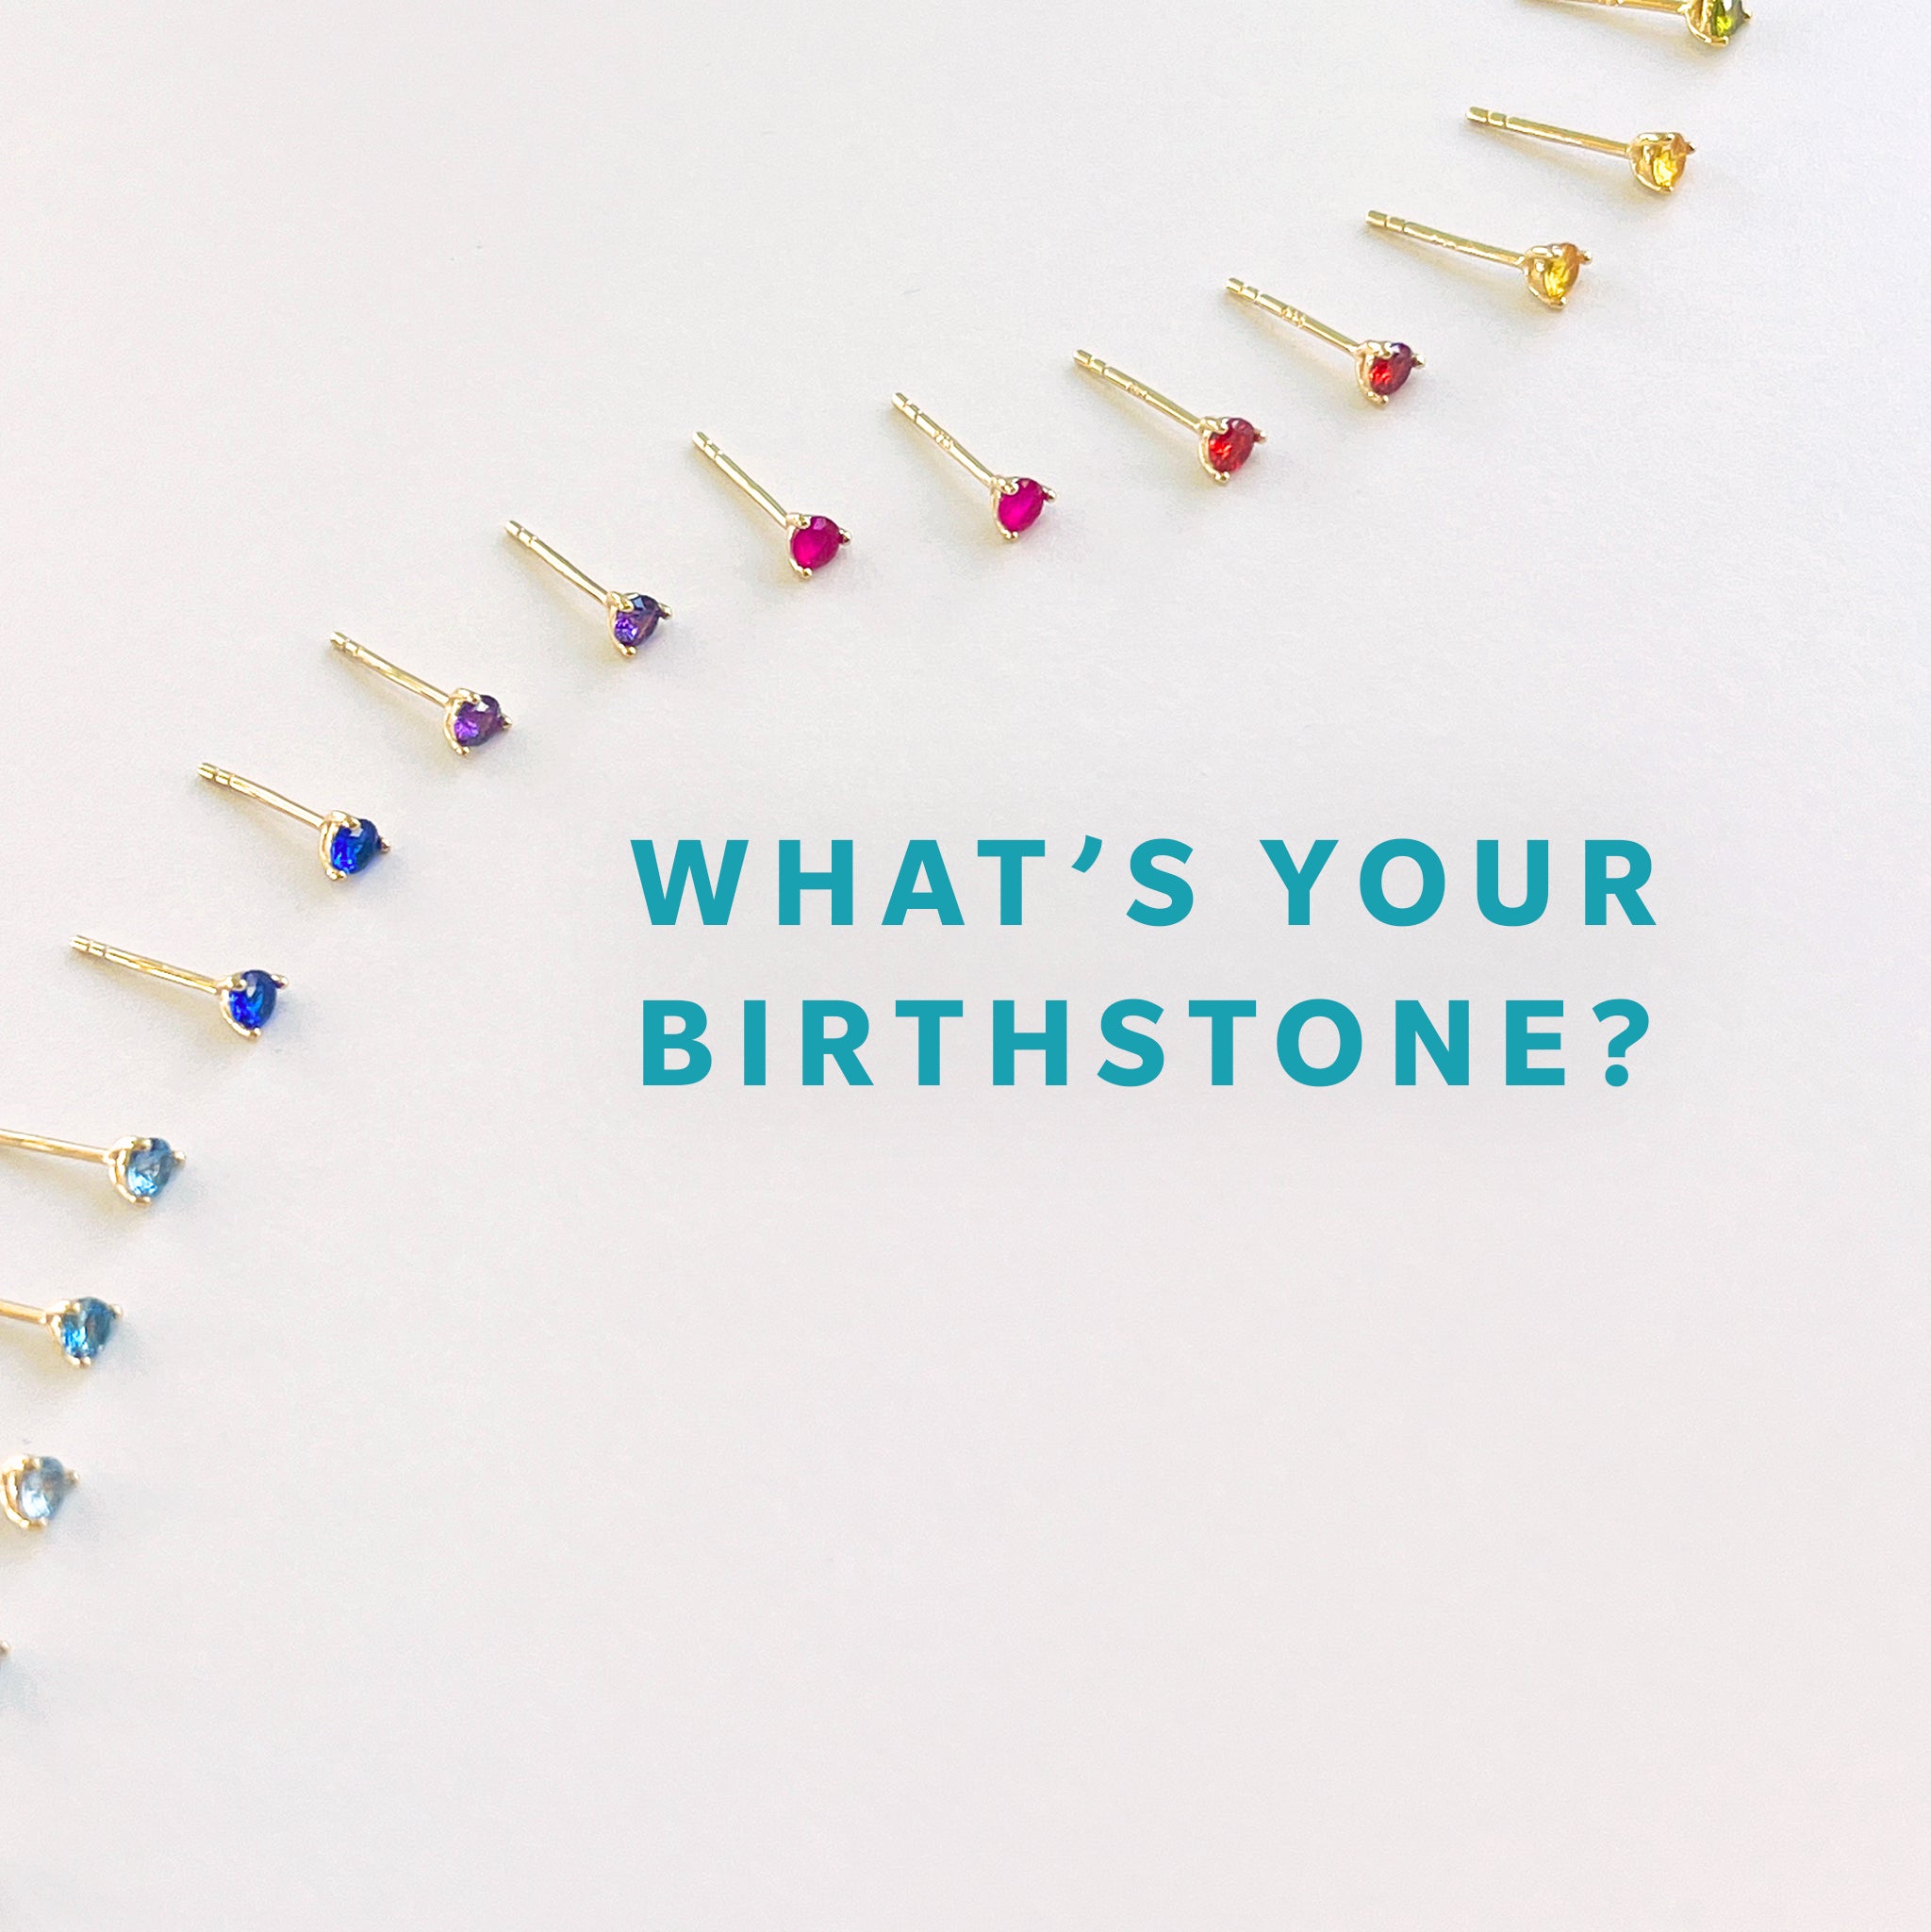 Birthstones and their Meanings